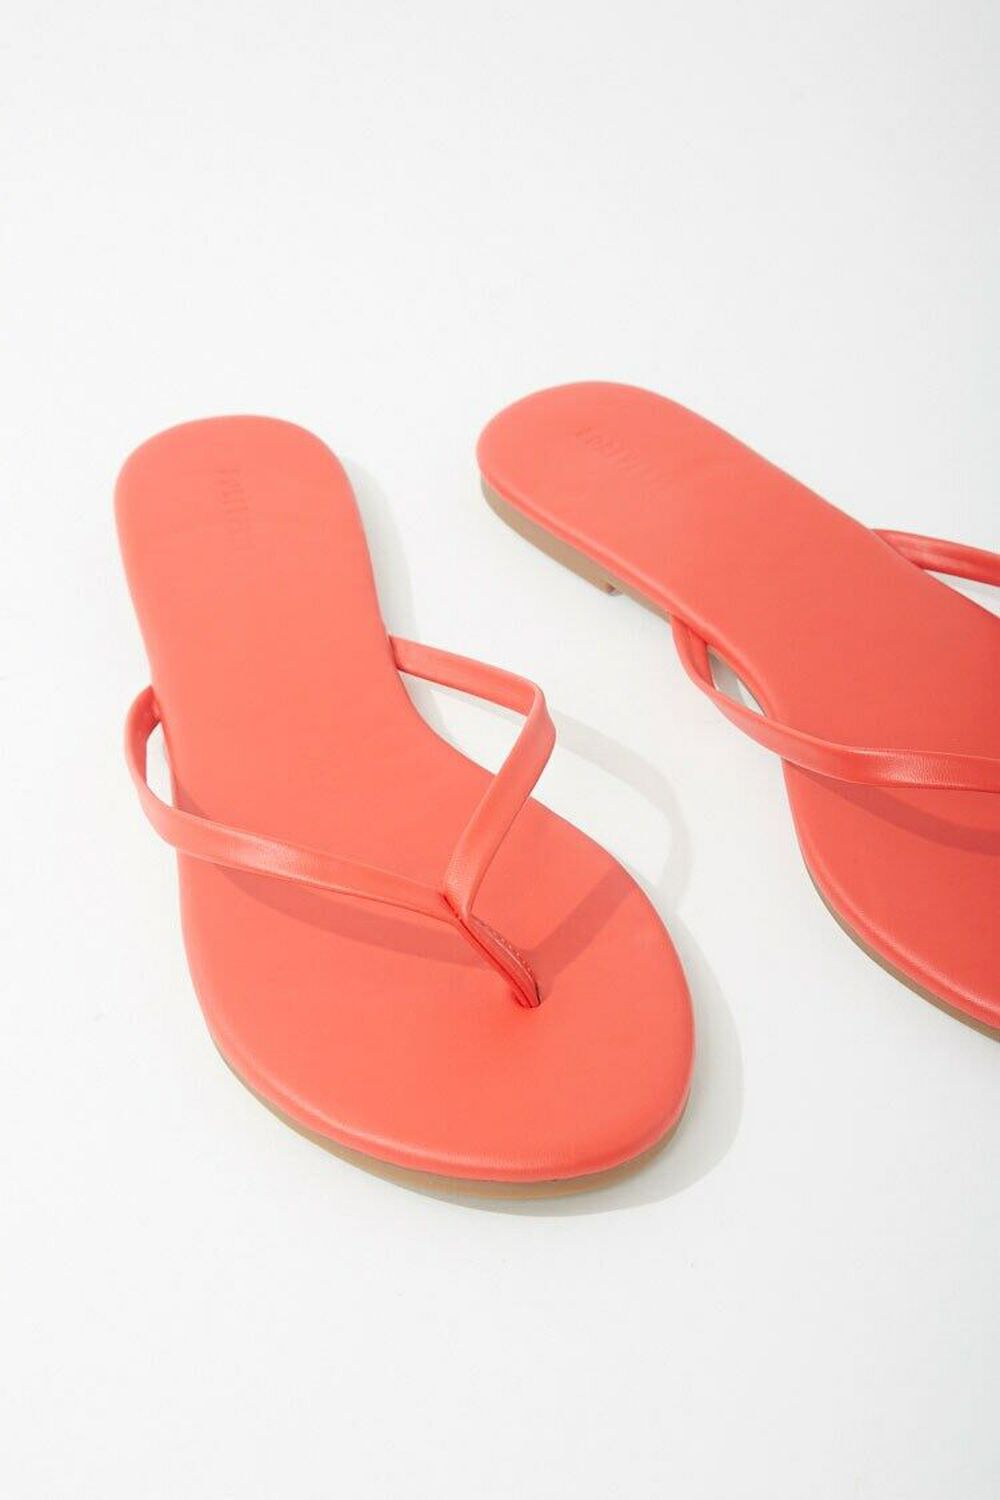 RED Faux Leather Flip Flops, image 3